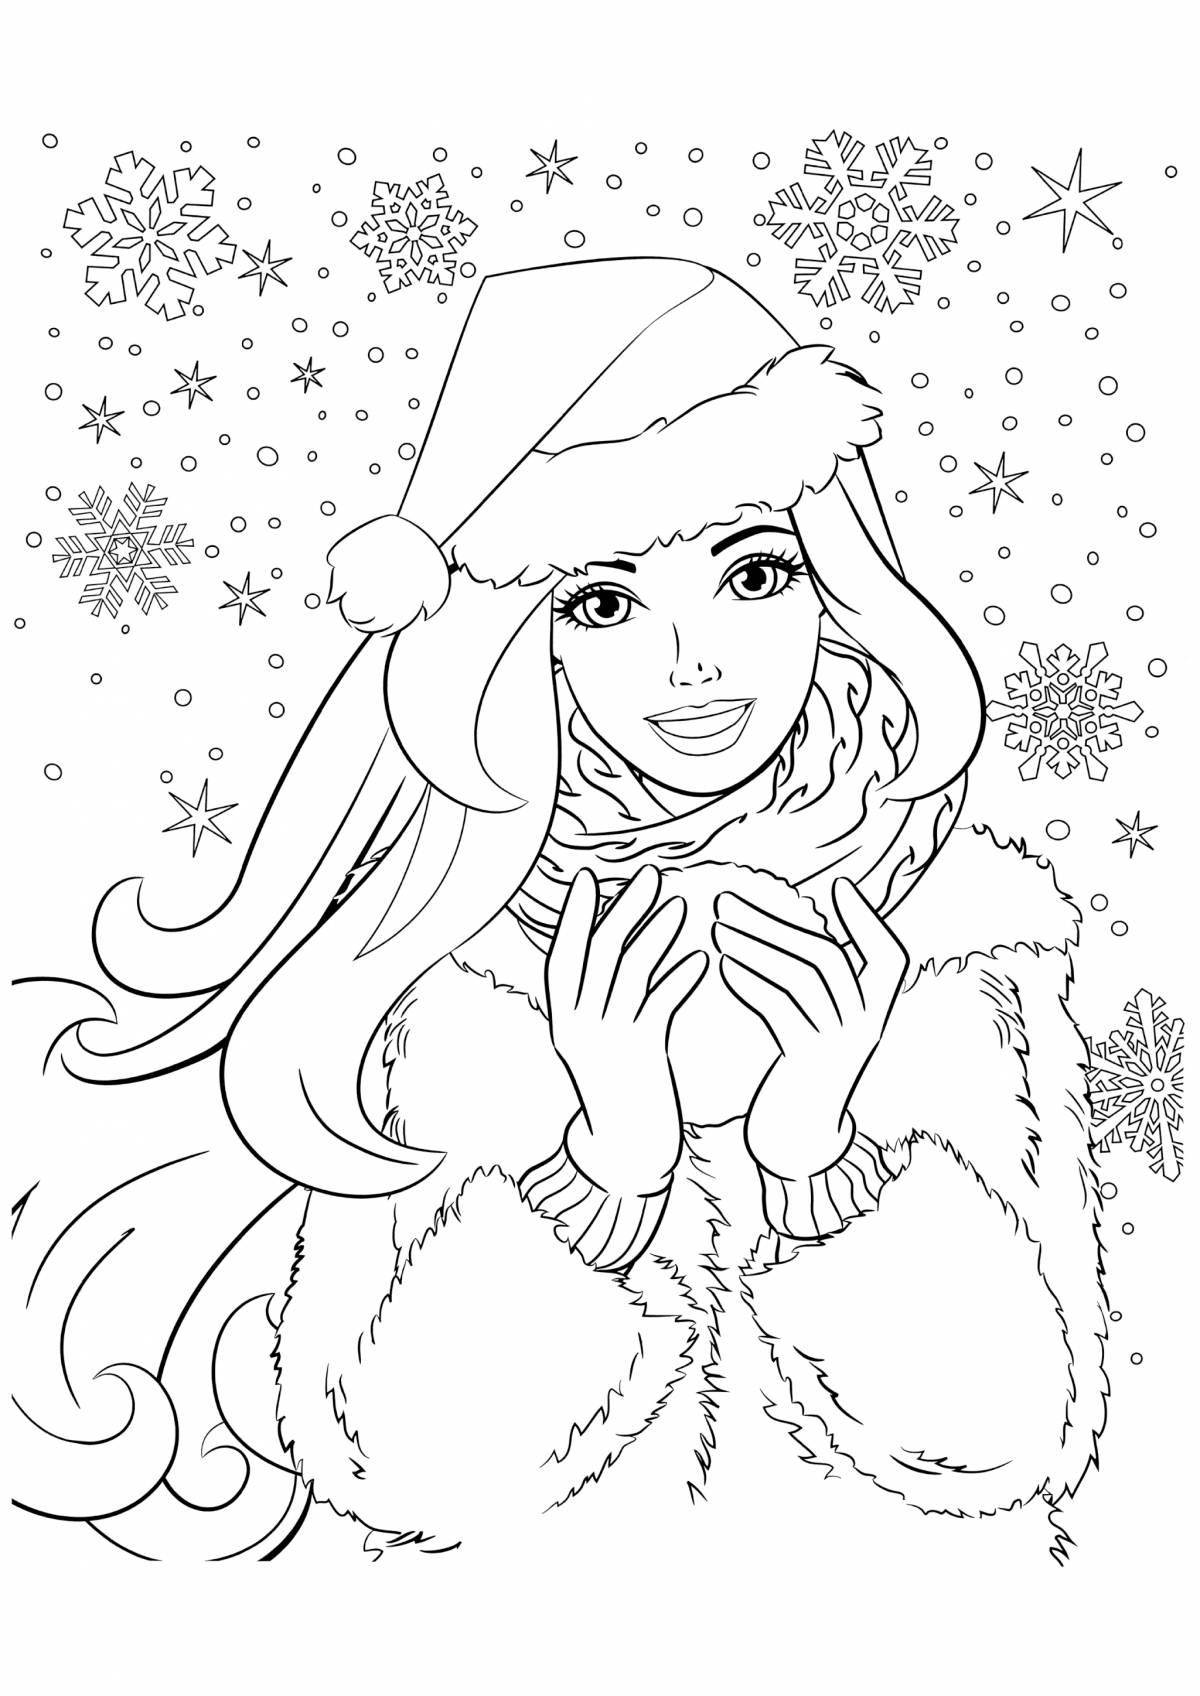 Barbie's glamorous Christmas coloring book